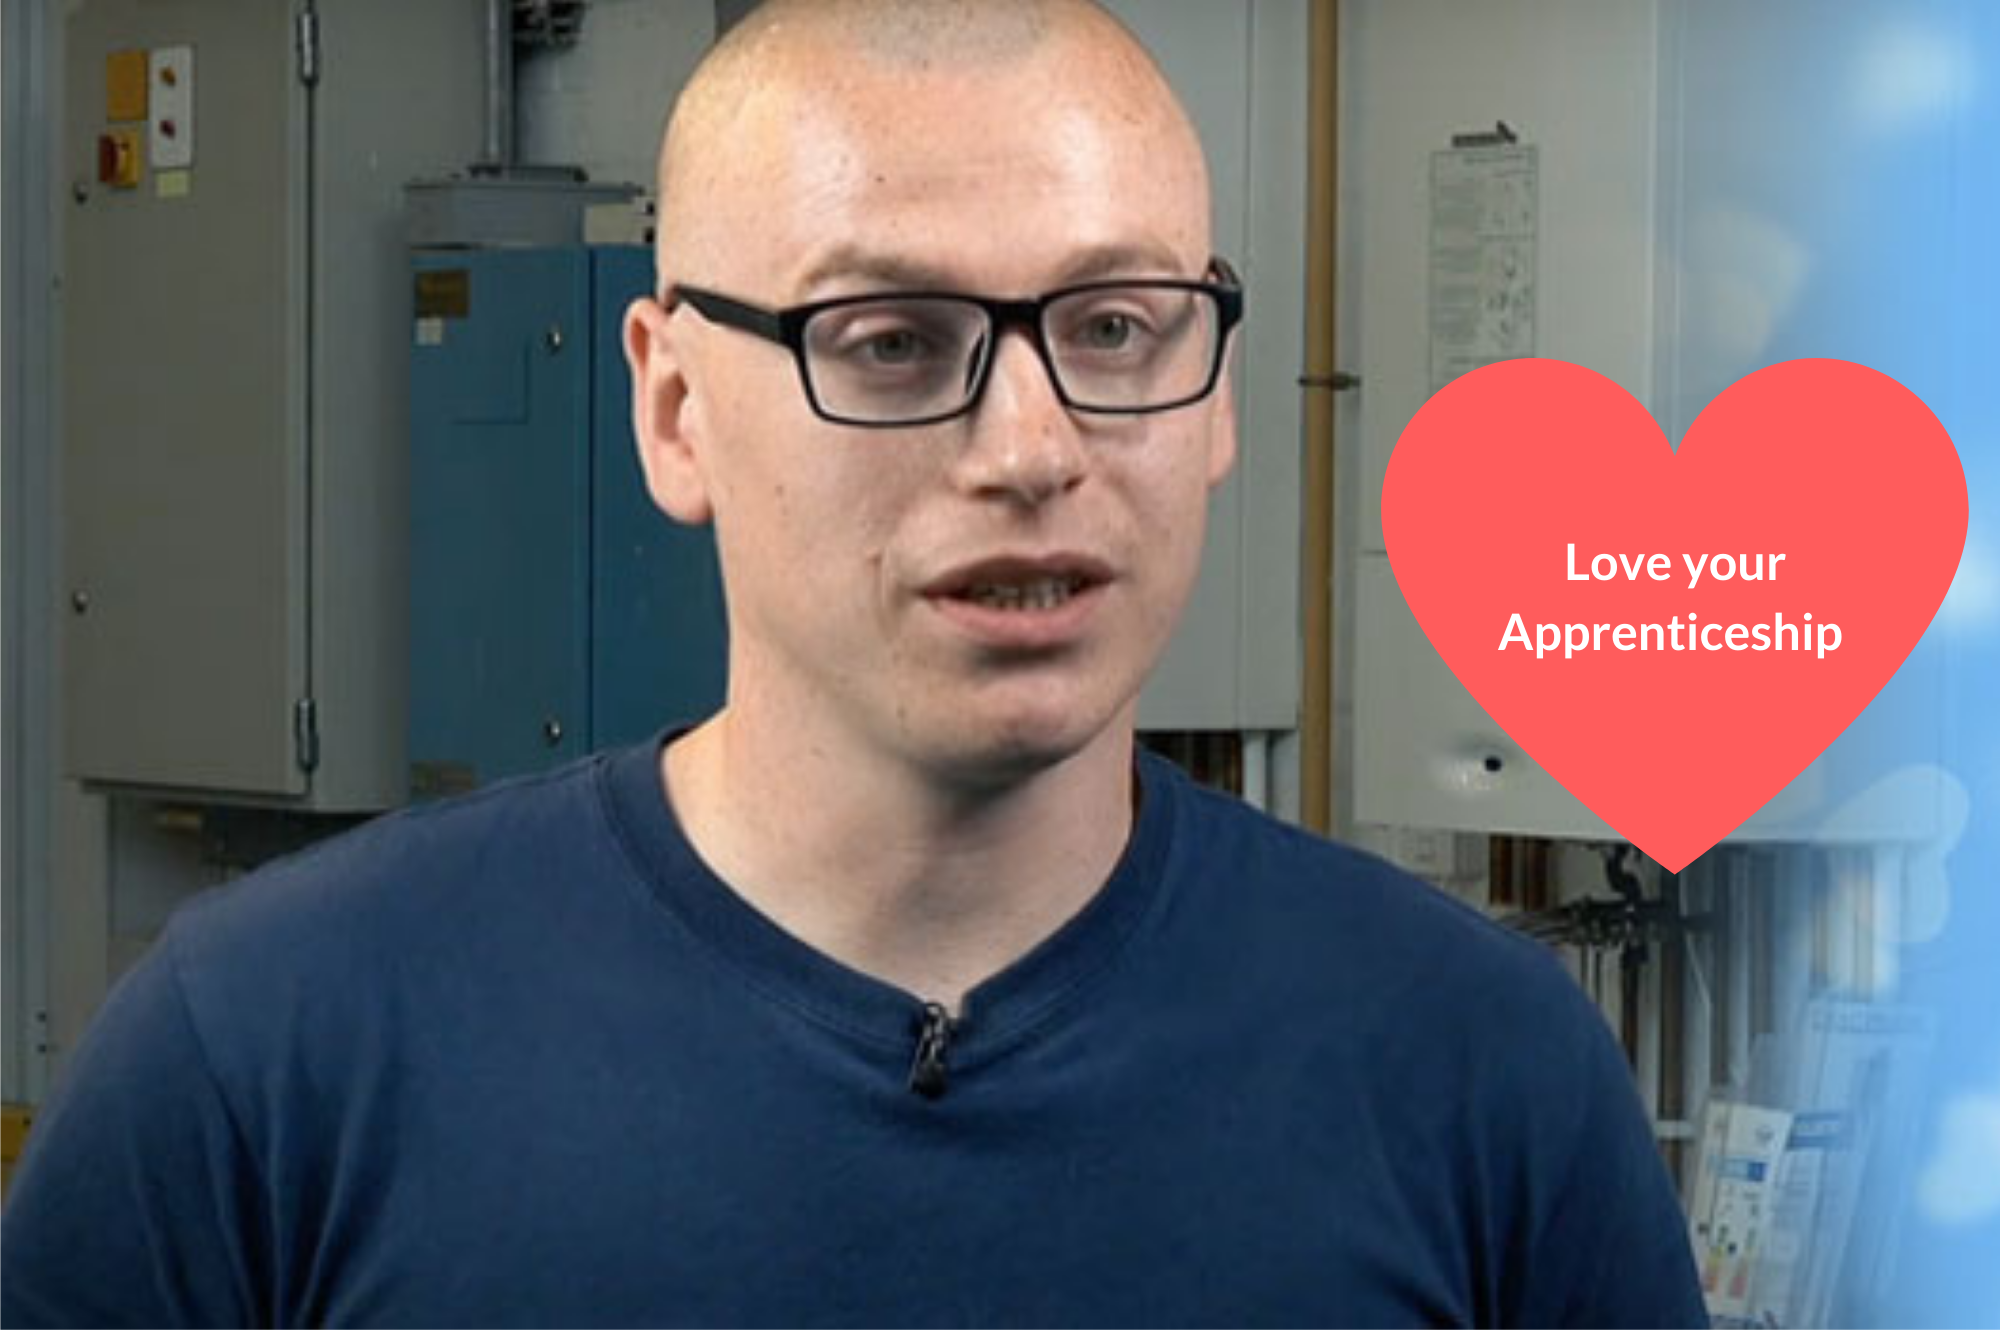 Are you loving your apprenticeship like Dale?